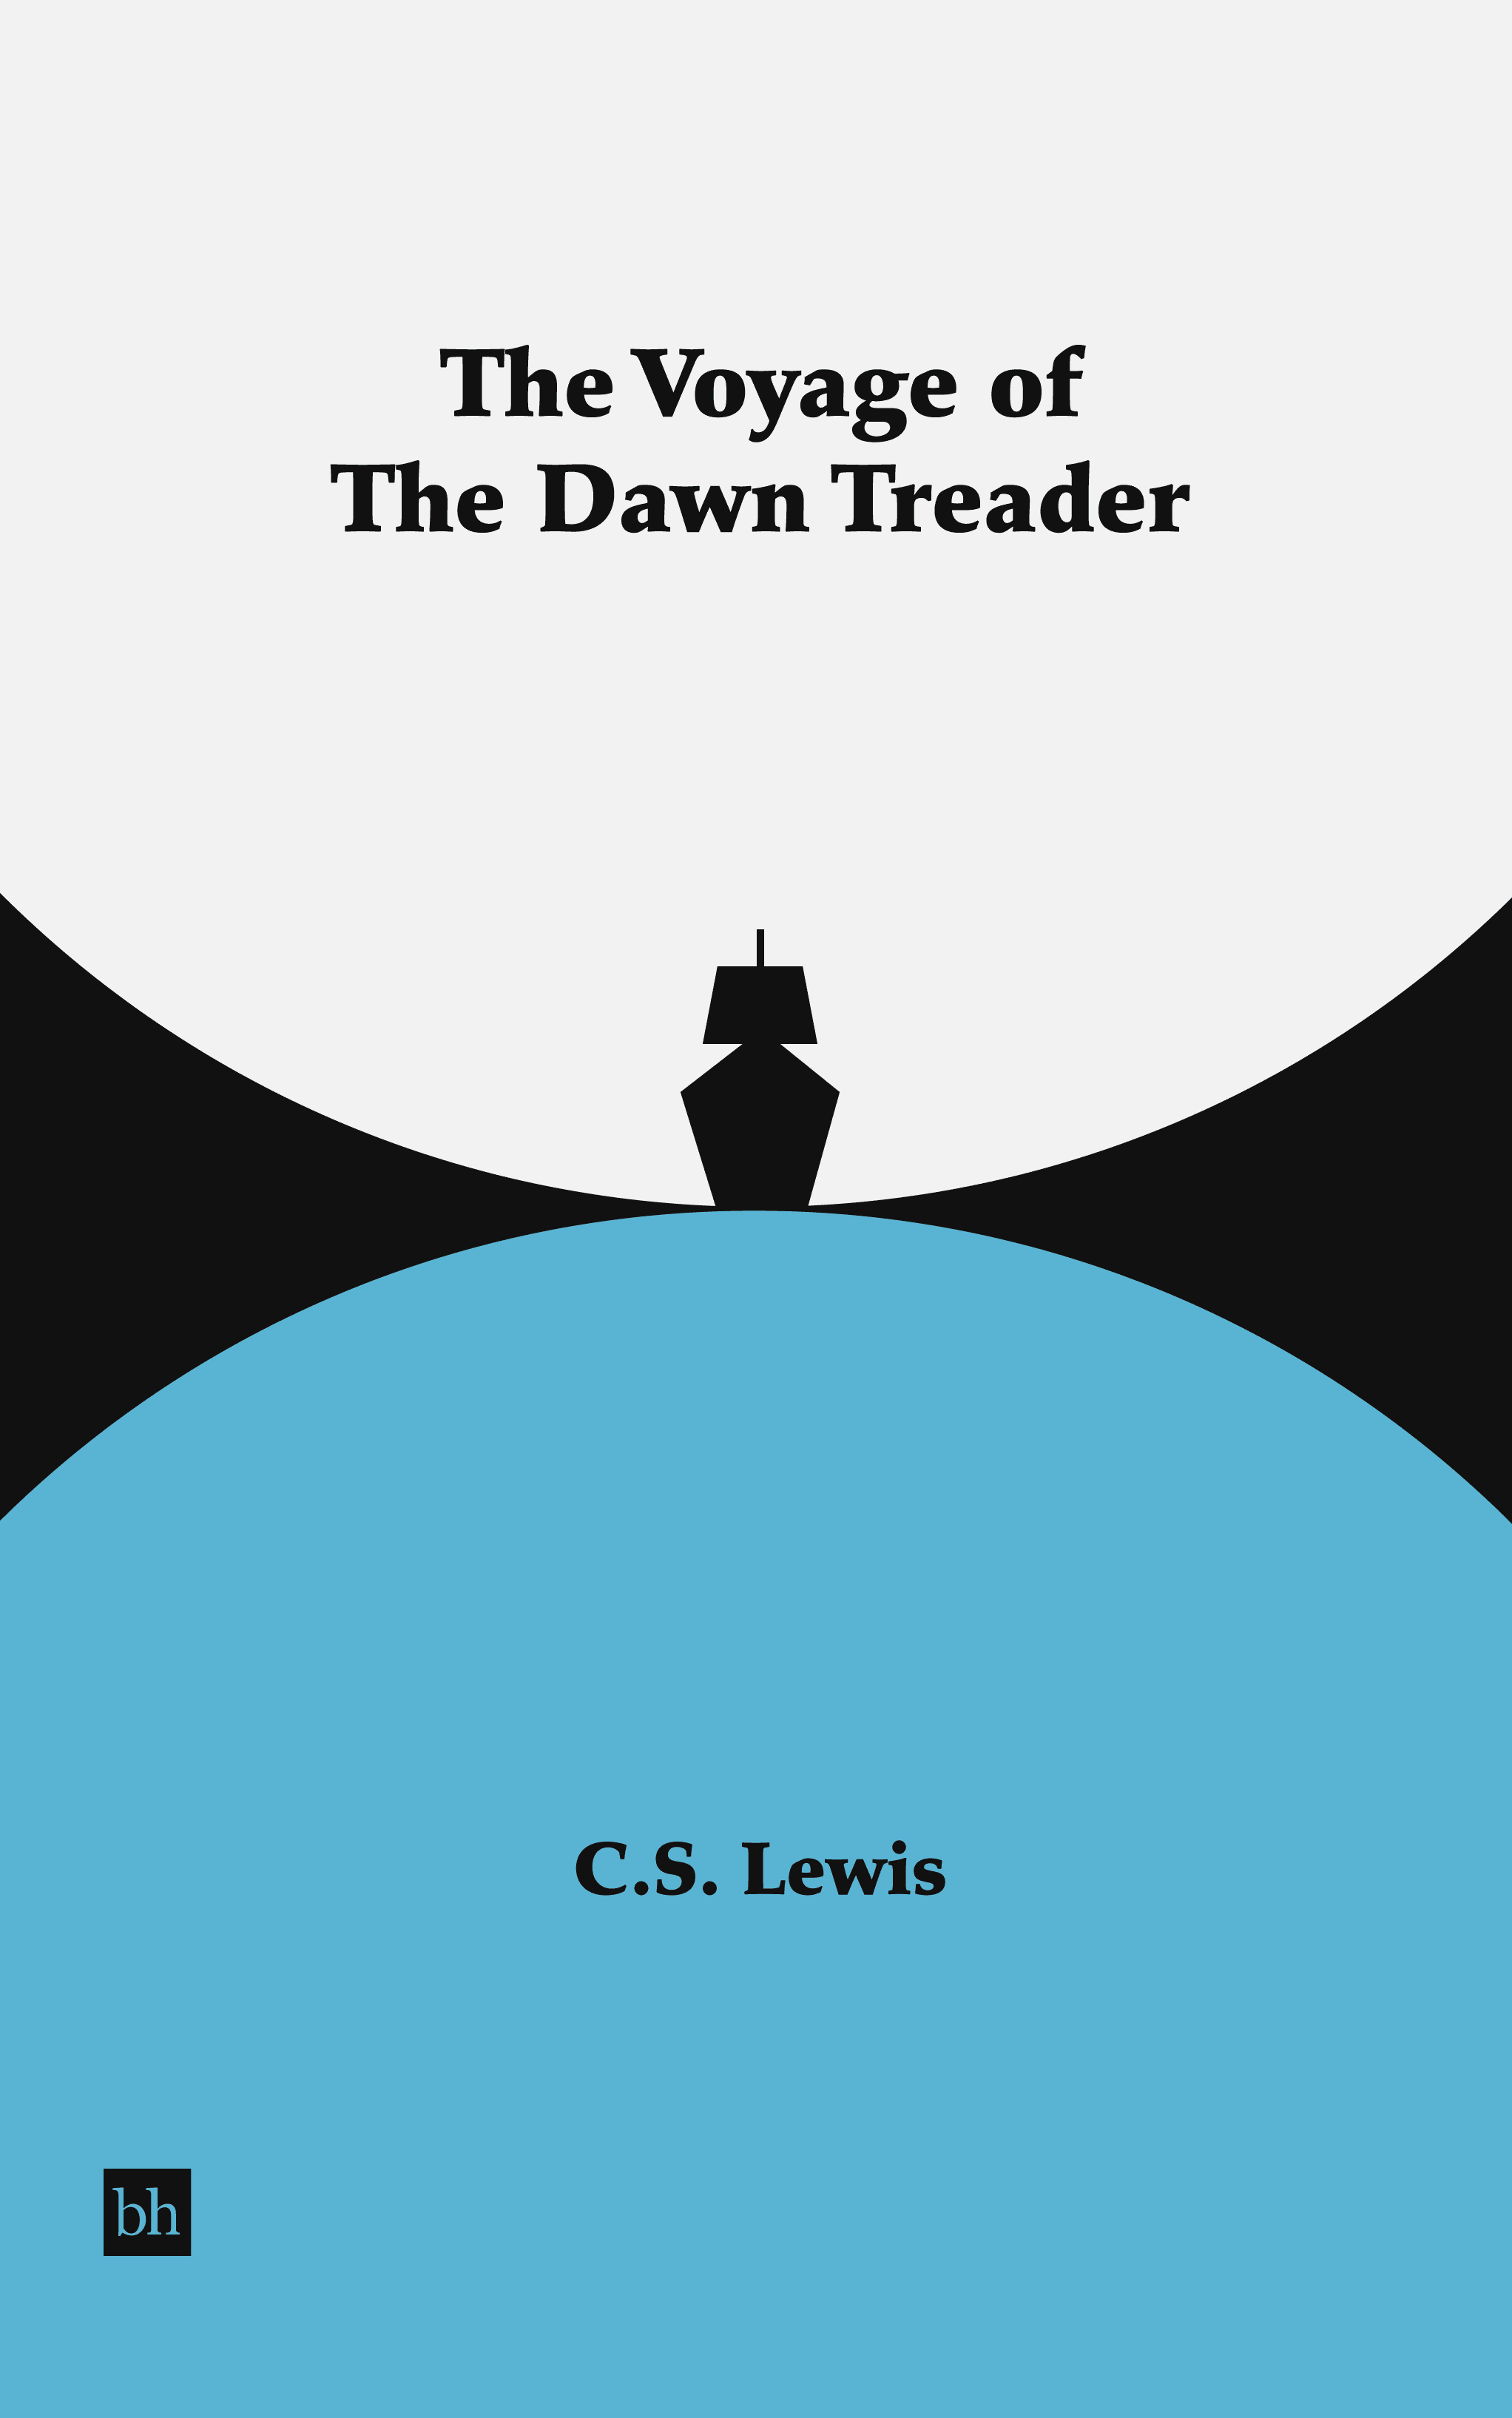 The Voyage of The Dawn Treader by C.S. Lewis